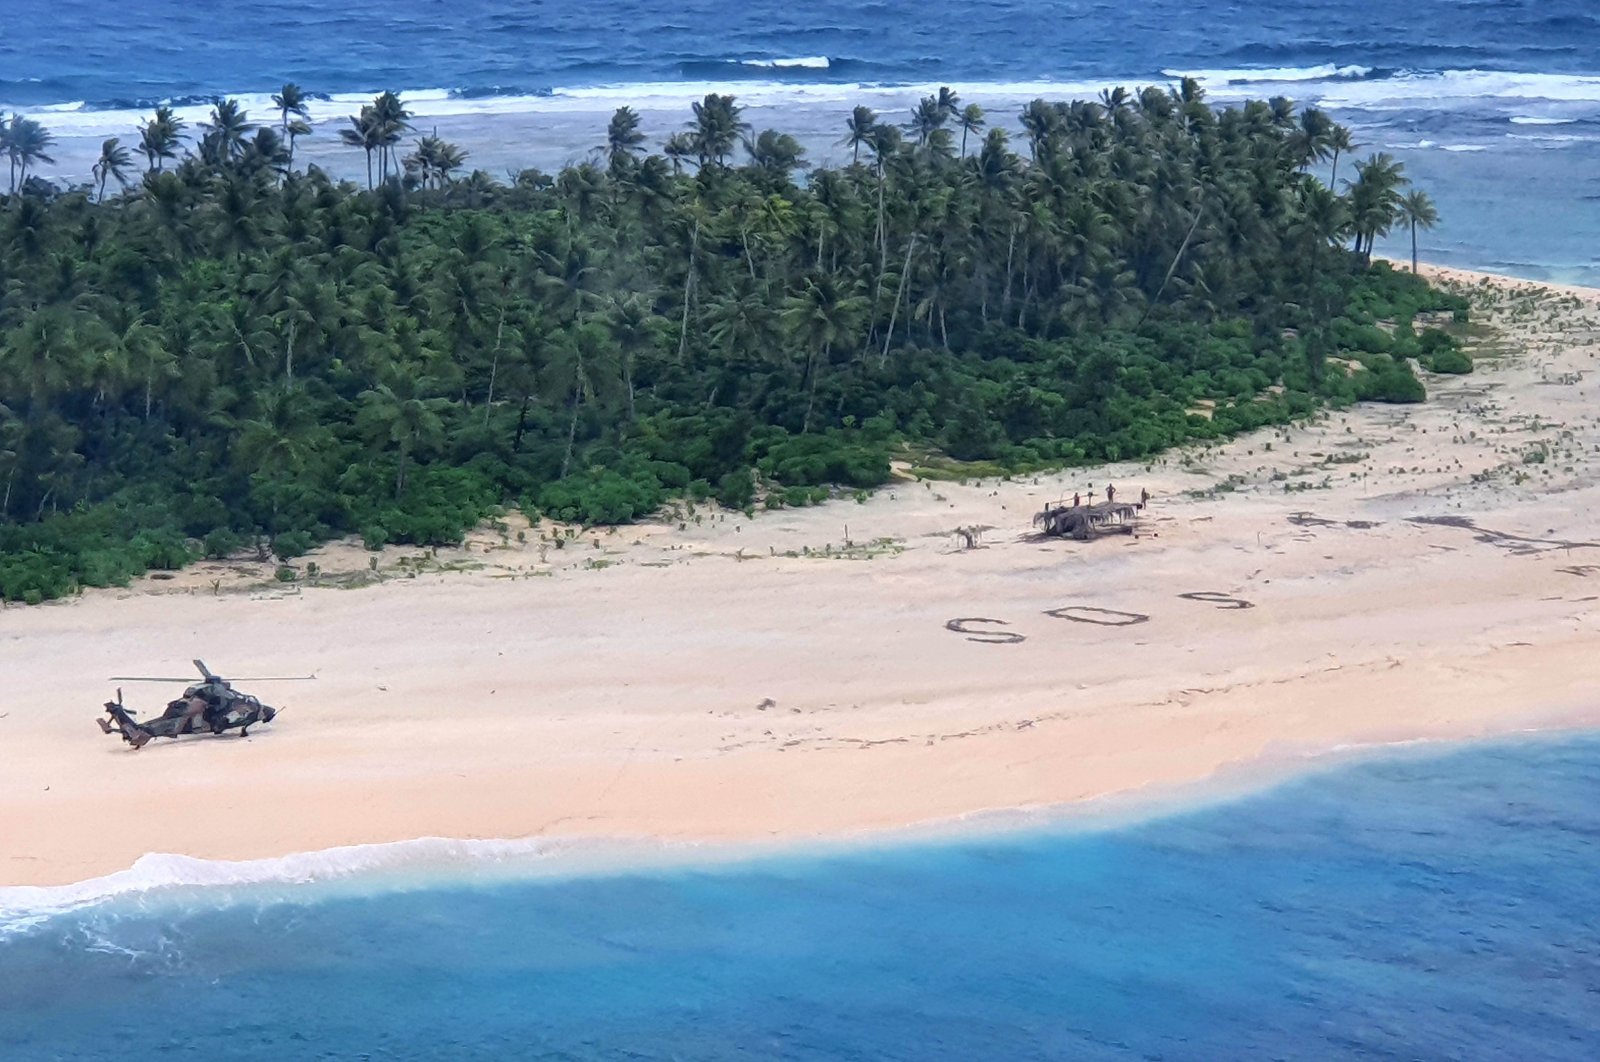 An Australian Army ARH Tiger helicopter lands near the letters "SOS" on a beach on Pikelot Island where three men were found in good condition after being missing for three days, Aug. 2, 2020. (Australian Defence Force Photo via AFP)